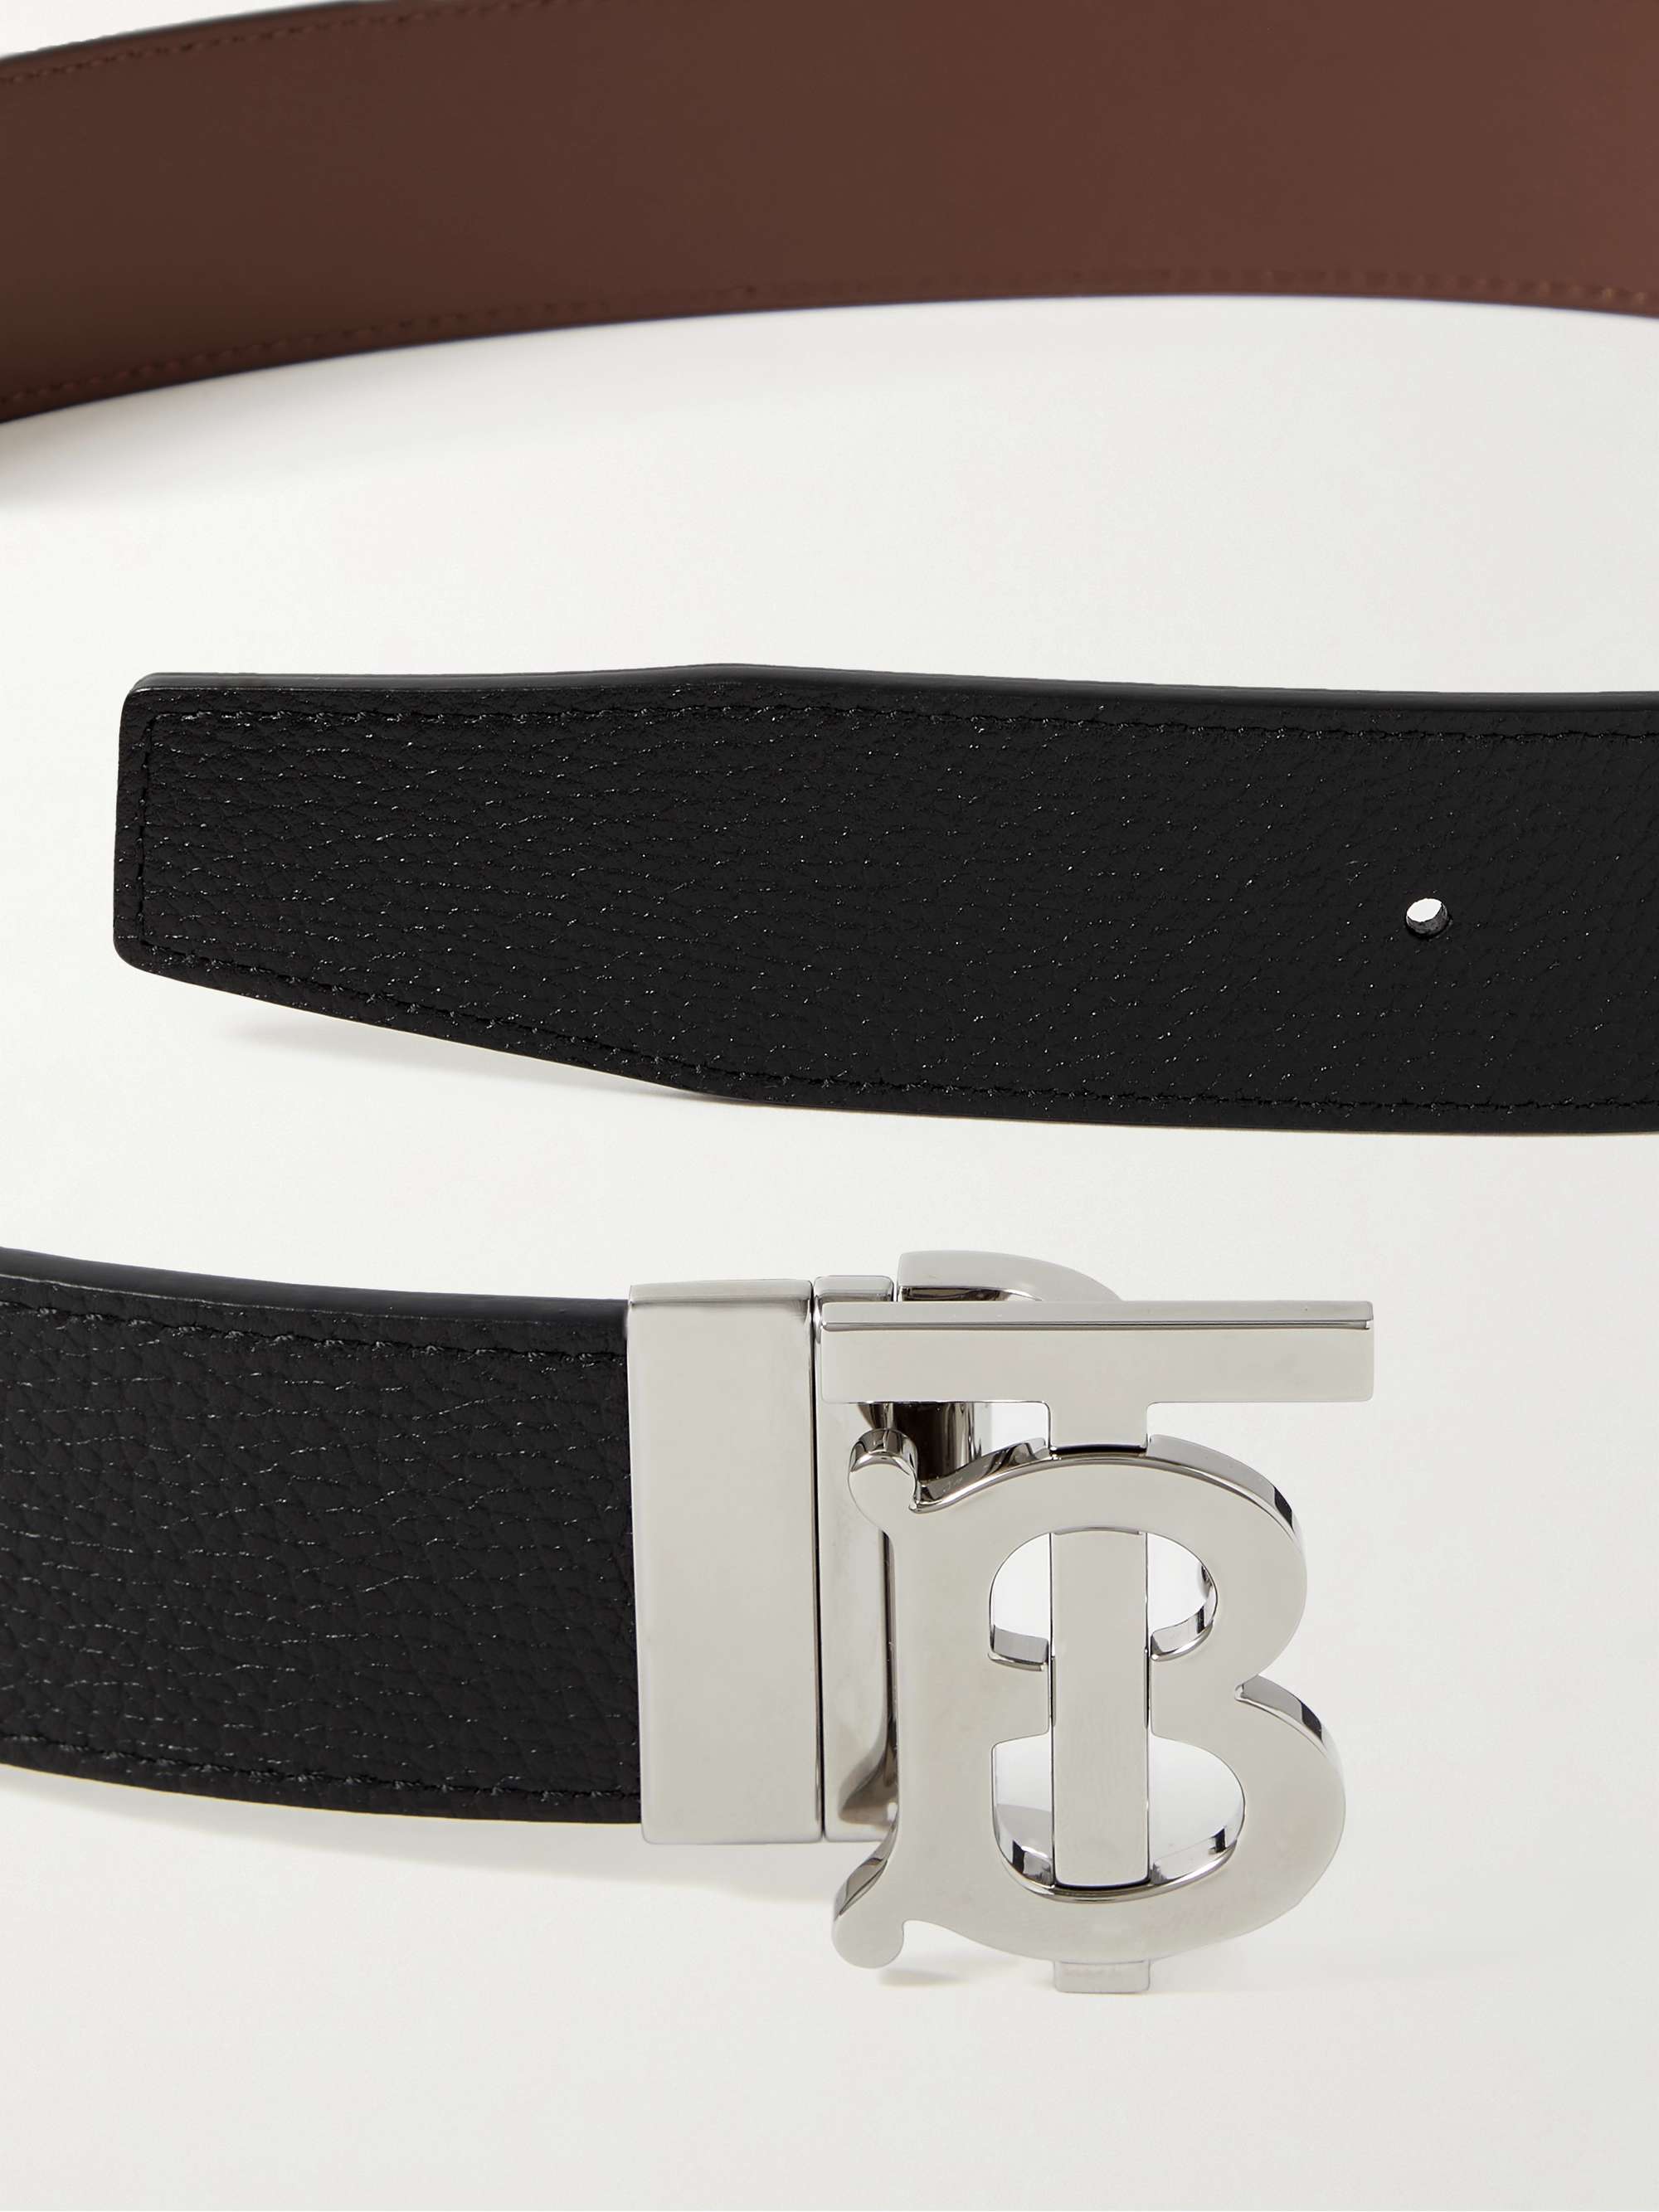 Burberry Leather Belts for Men